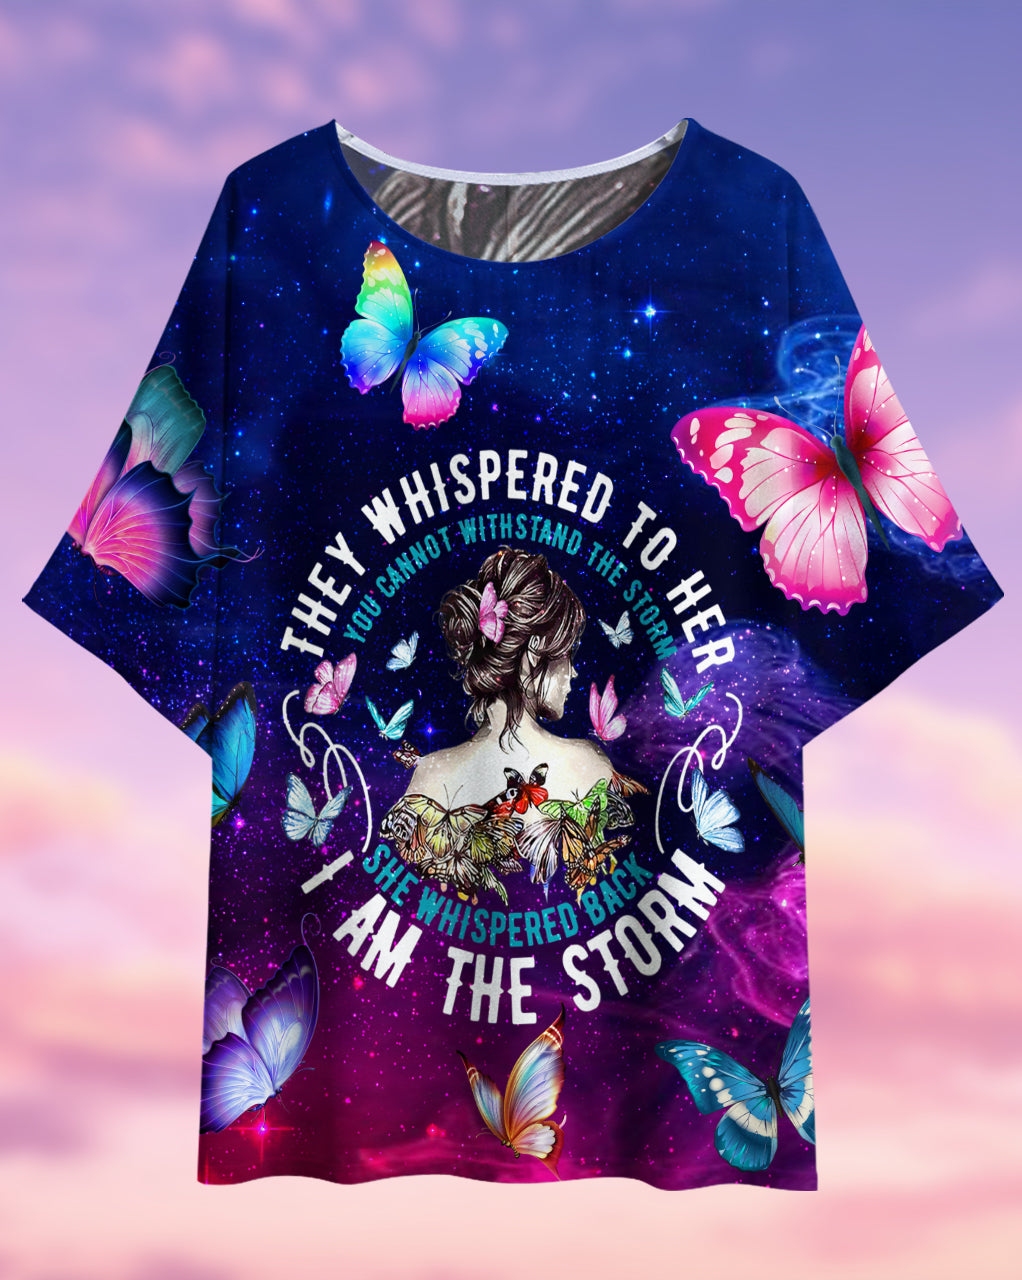 Hippie They Whispered To Her You Cannot Withstand The Storm - Women's T-shirt With Bat Sleeve - Owls Matrix LTD